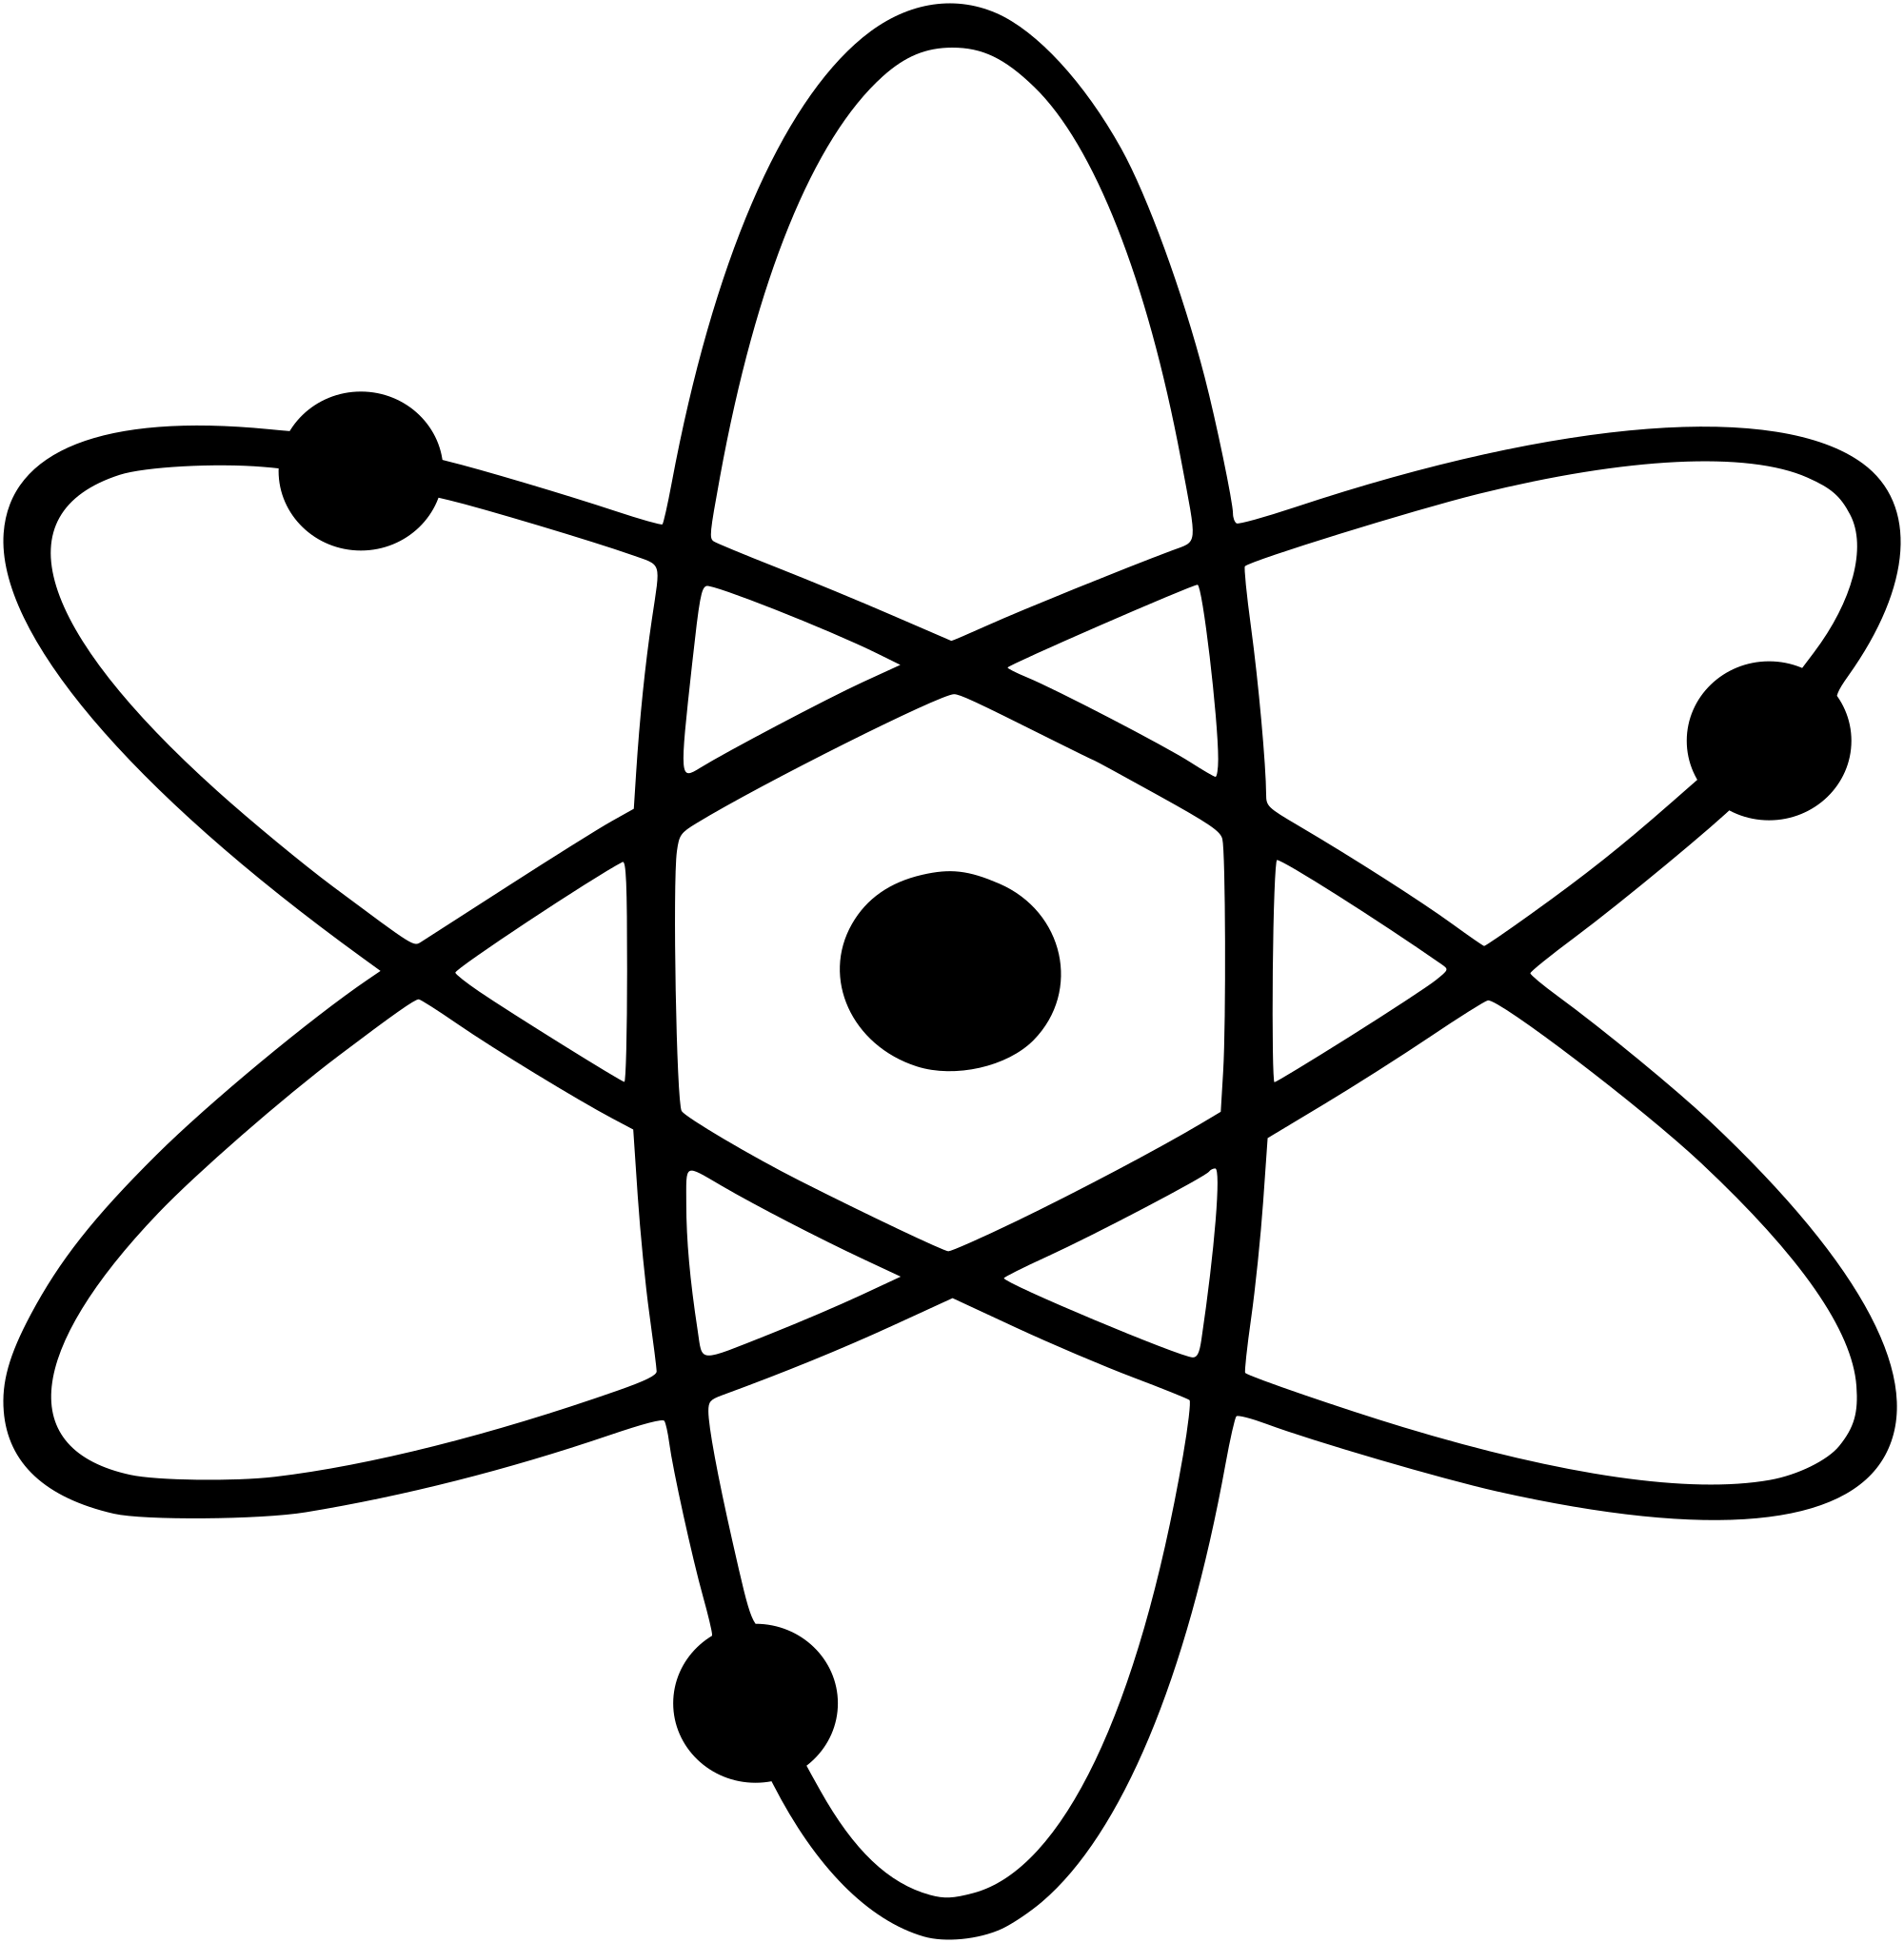 Big Bang Logo - File:Atom symbol as used in the logo of the television series The ...